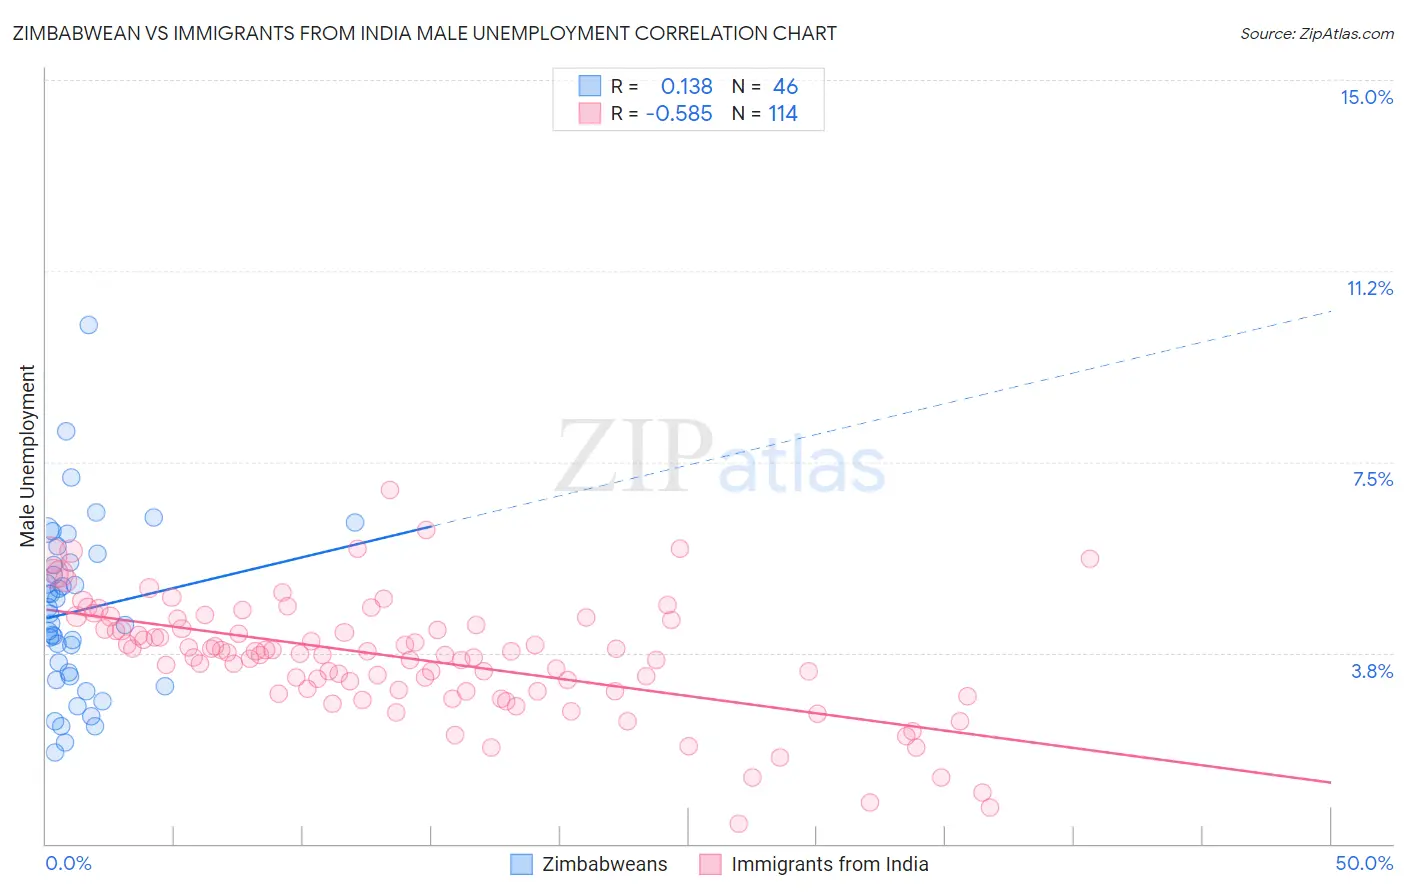 Zimbabwean vs Immigrants from India Male Unemployment